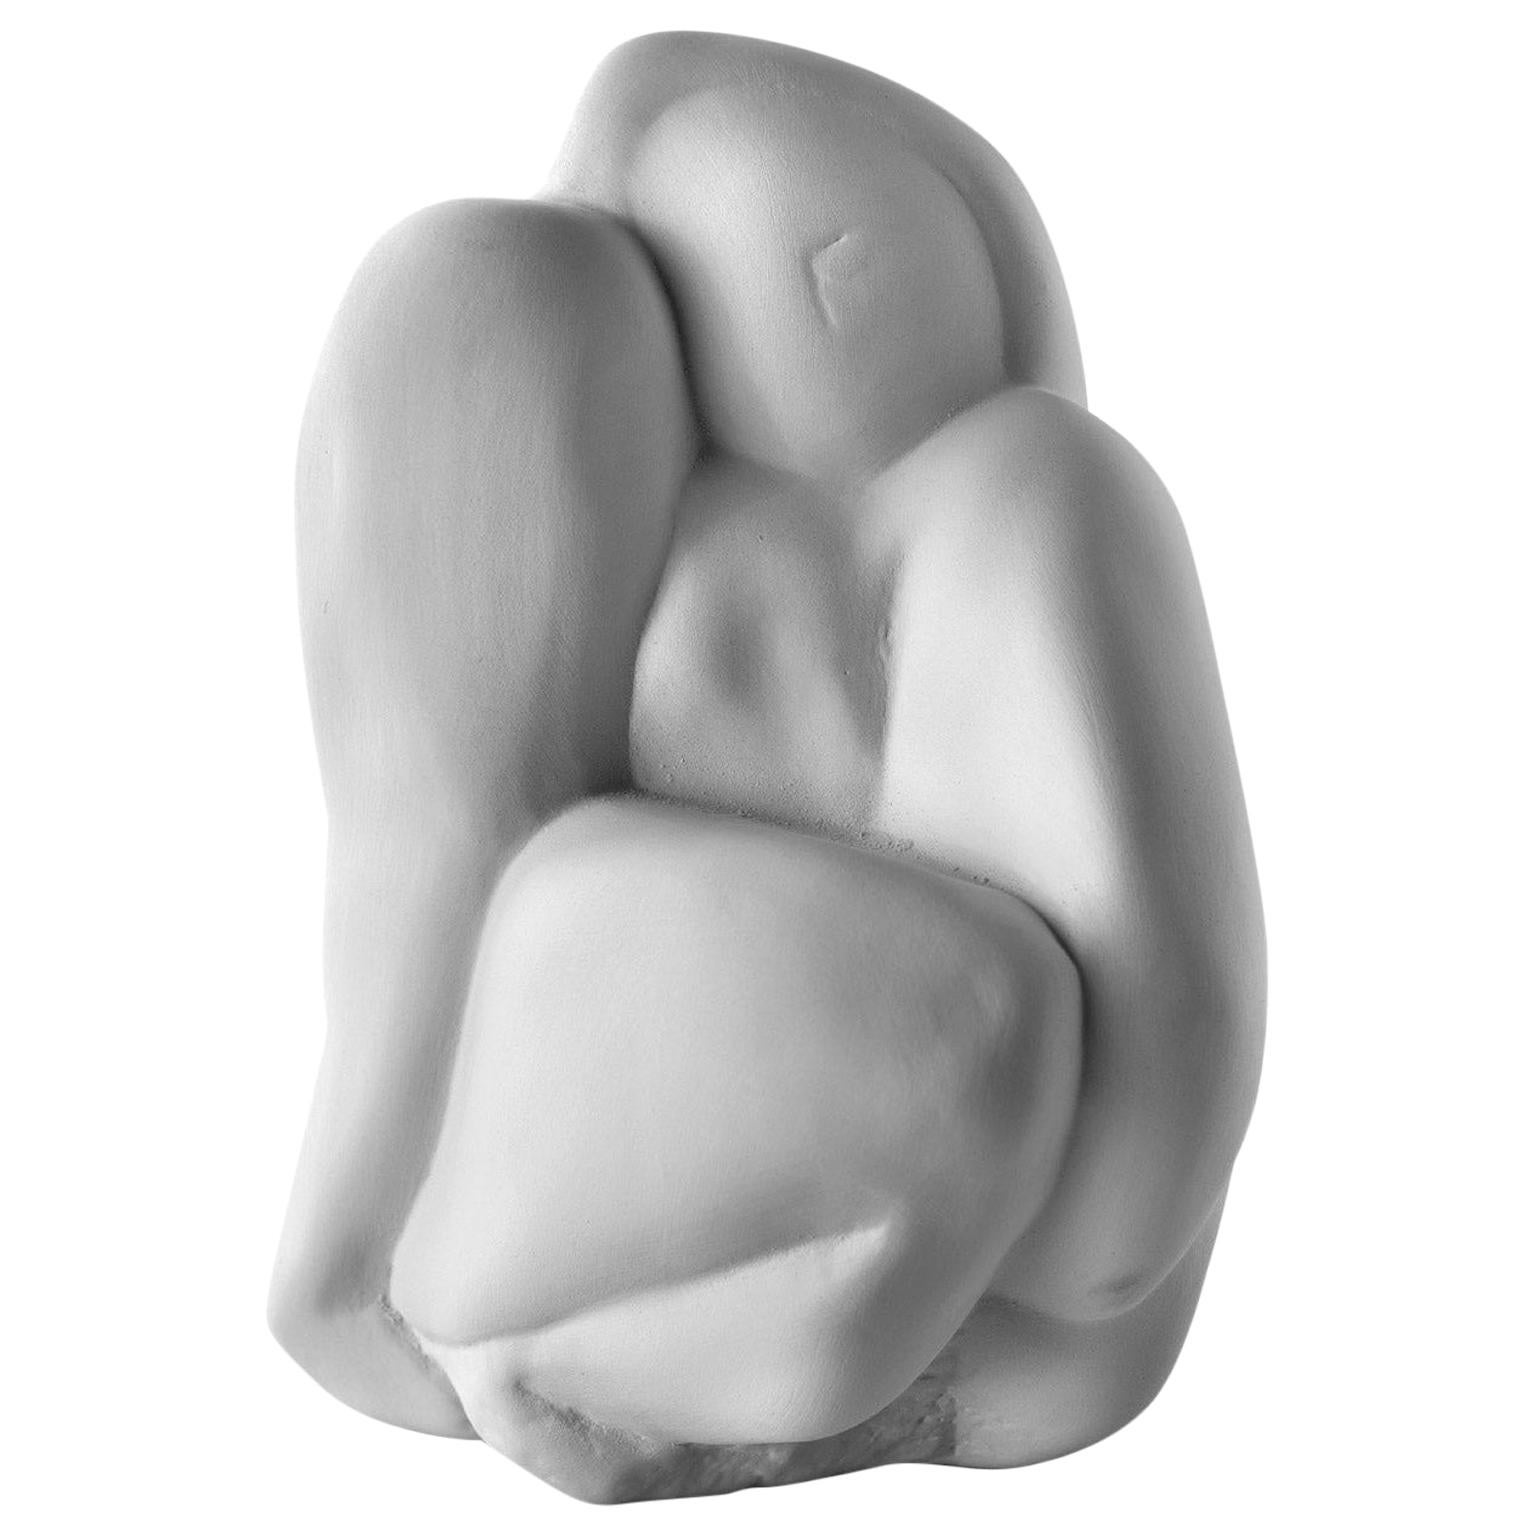 Ceramic Sculpture "MATER" Handcrafted in White Matt, Gabriella B. Made in Italy For Sale